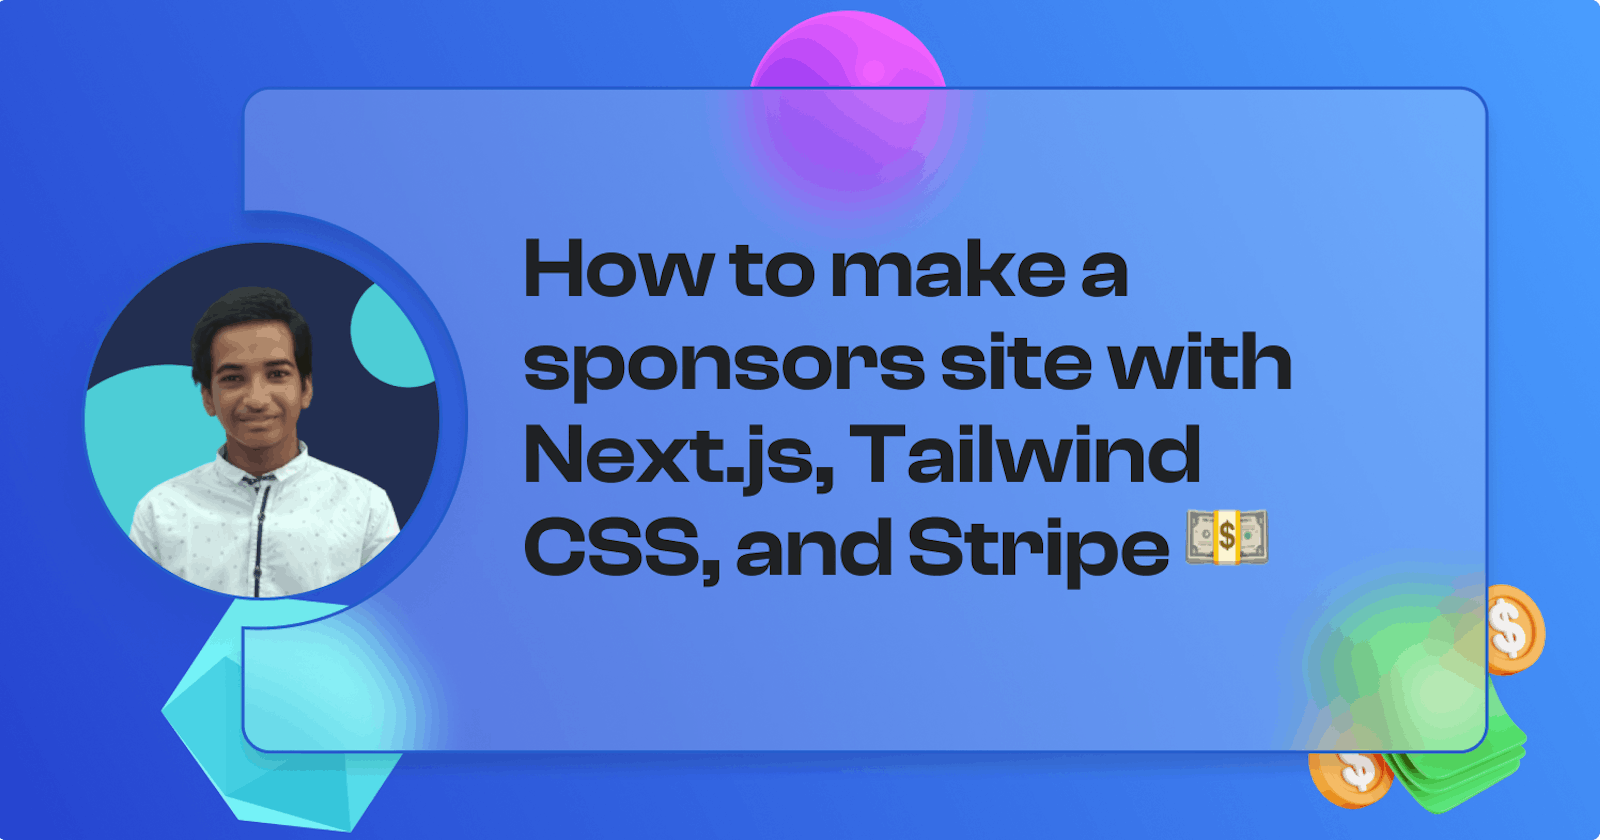 How to make a sponsors site with Next.js, Tailwind CSS, and Stripe 💵